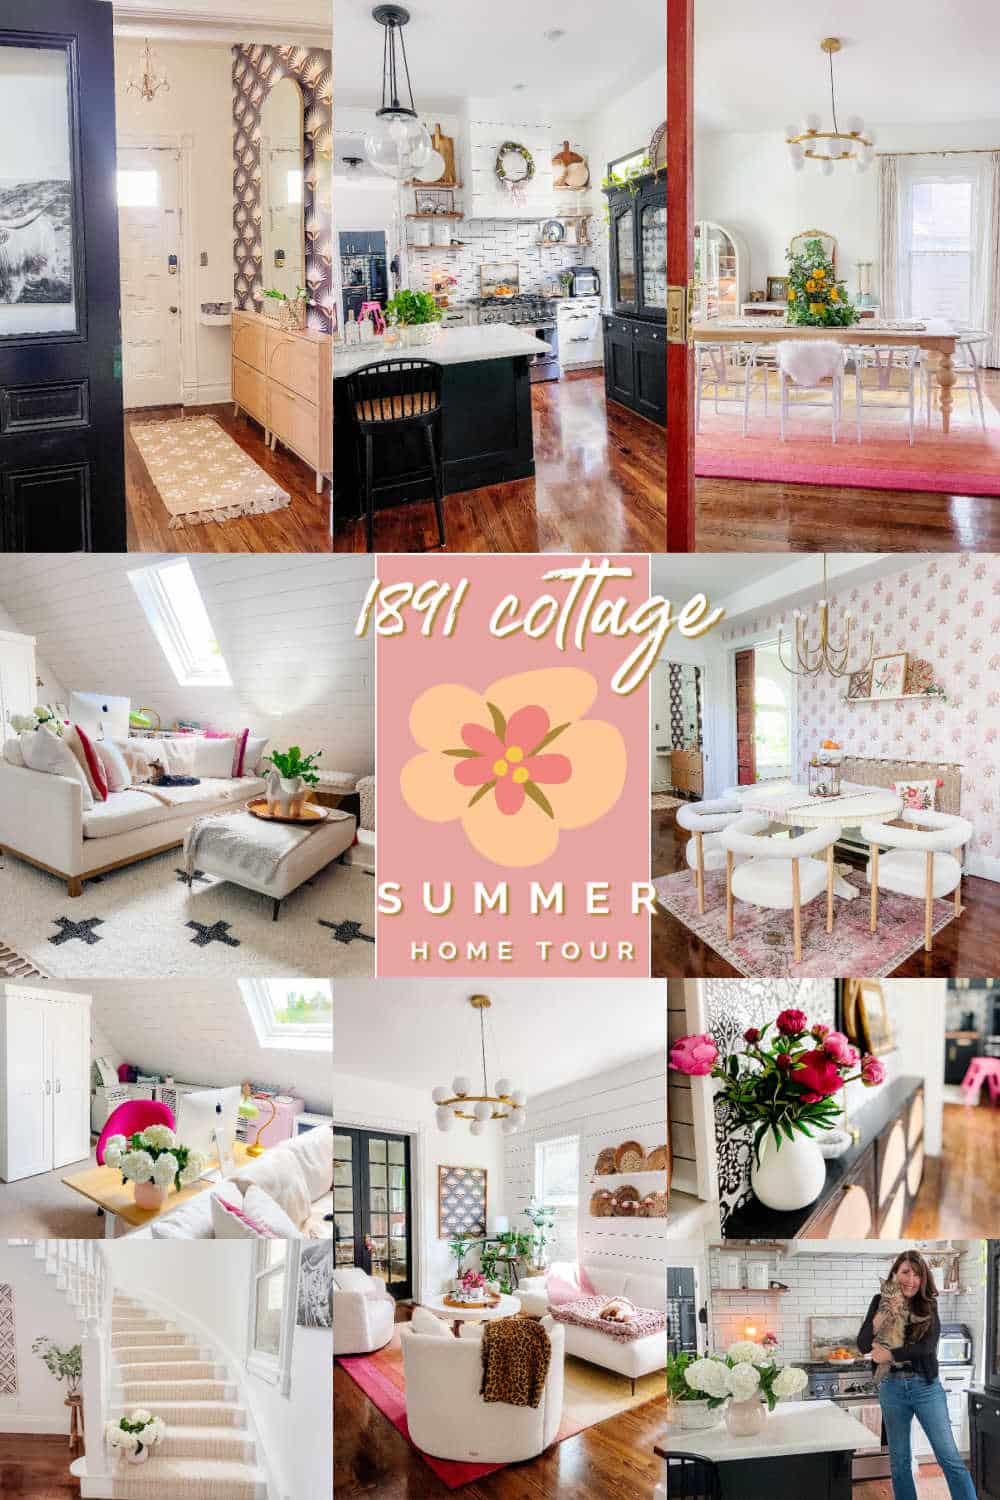 1891 Cottage Summer Home Ideas. Discover numerous inexpensive ways to add comfortable summer style to your home, inspired by my 1891 house transformation.